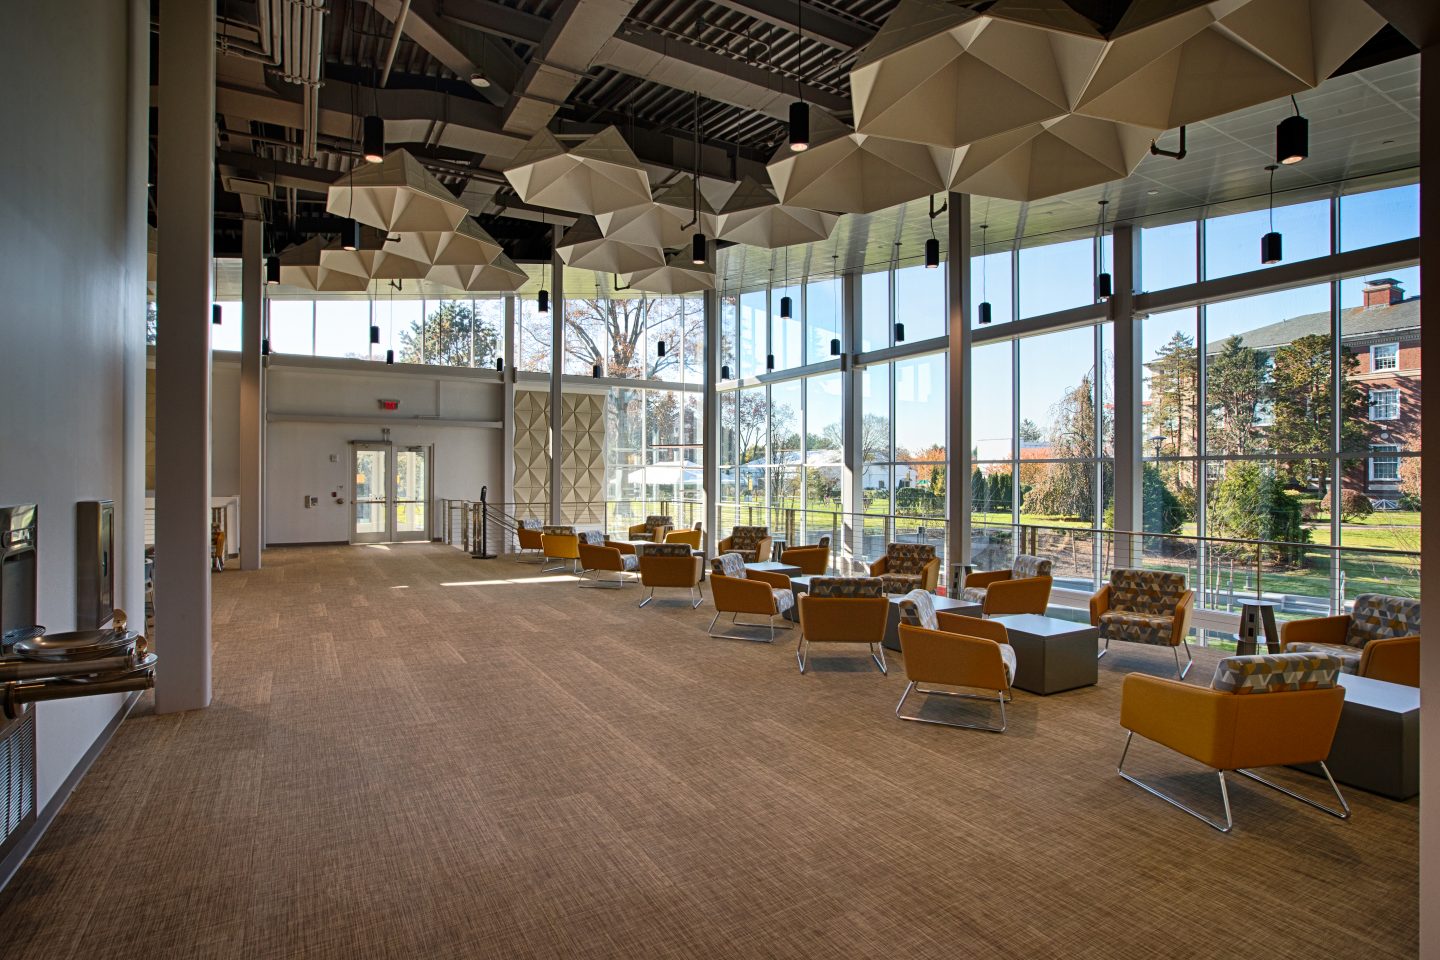 View of the seating near floor-to-ceiling windows in the UC